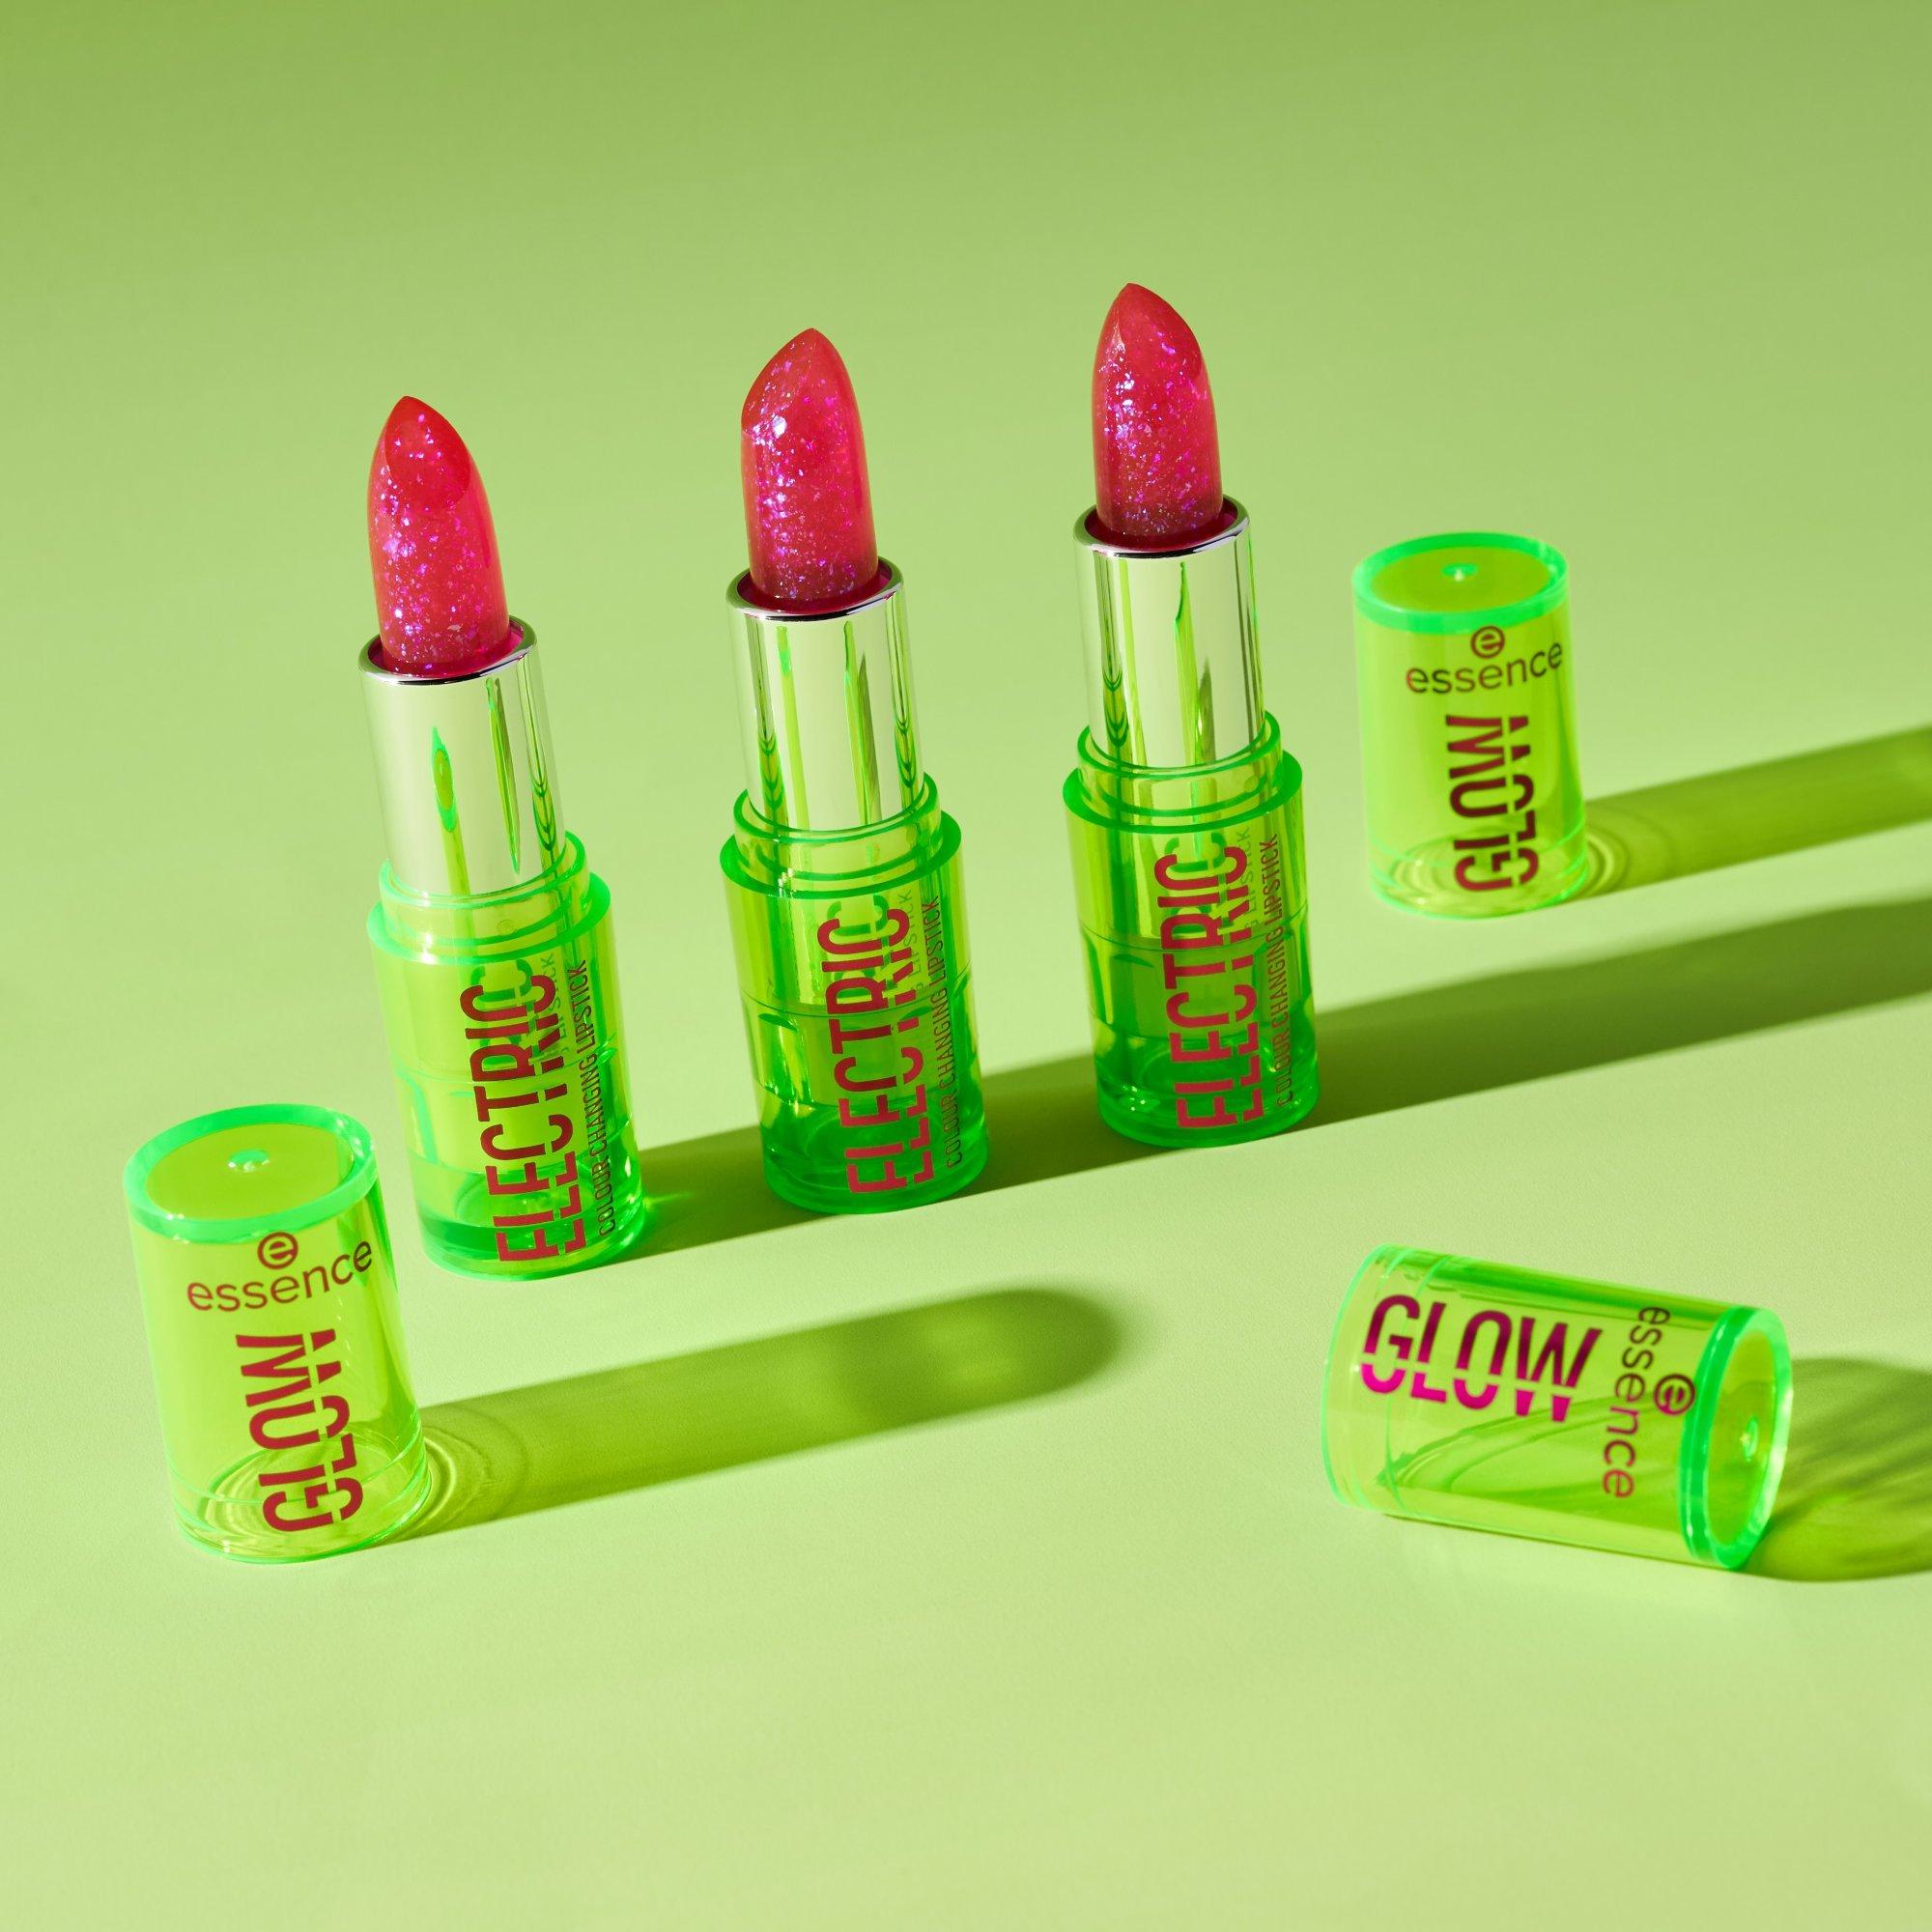 ELECTRIC GLOW colour changing lipstick